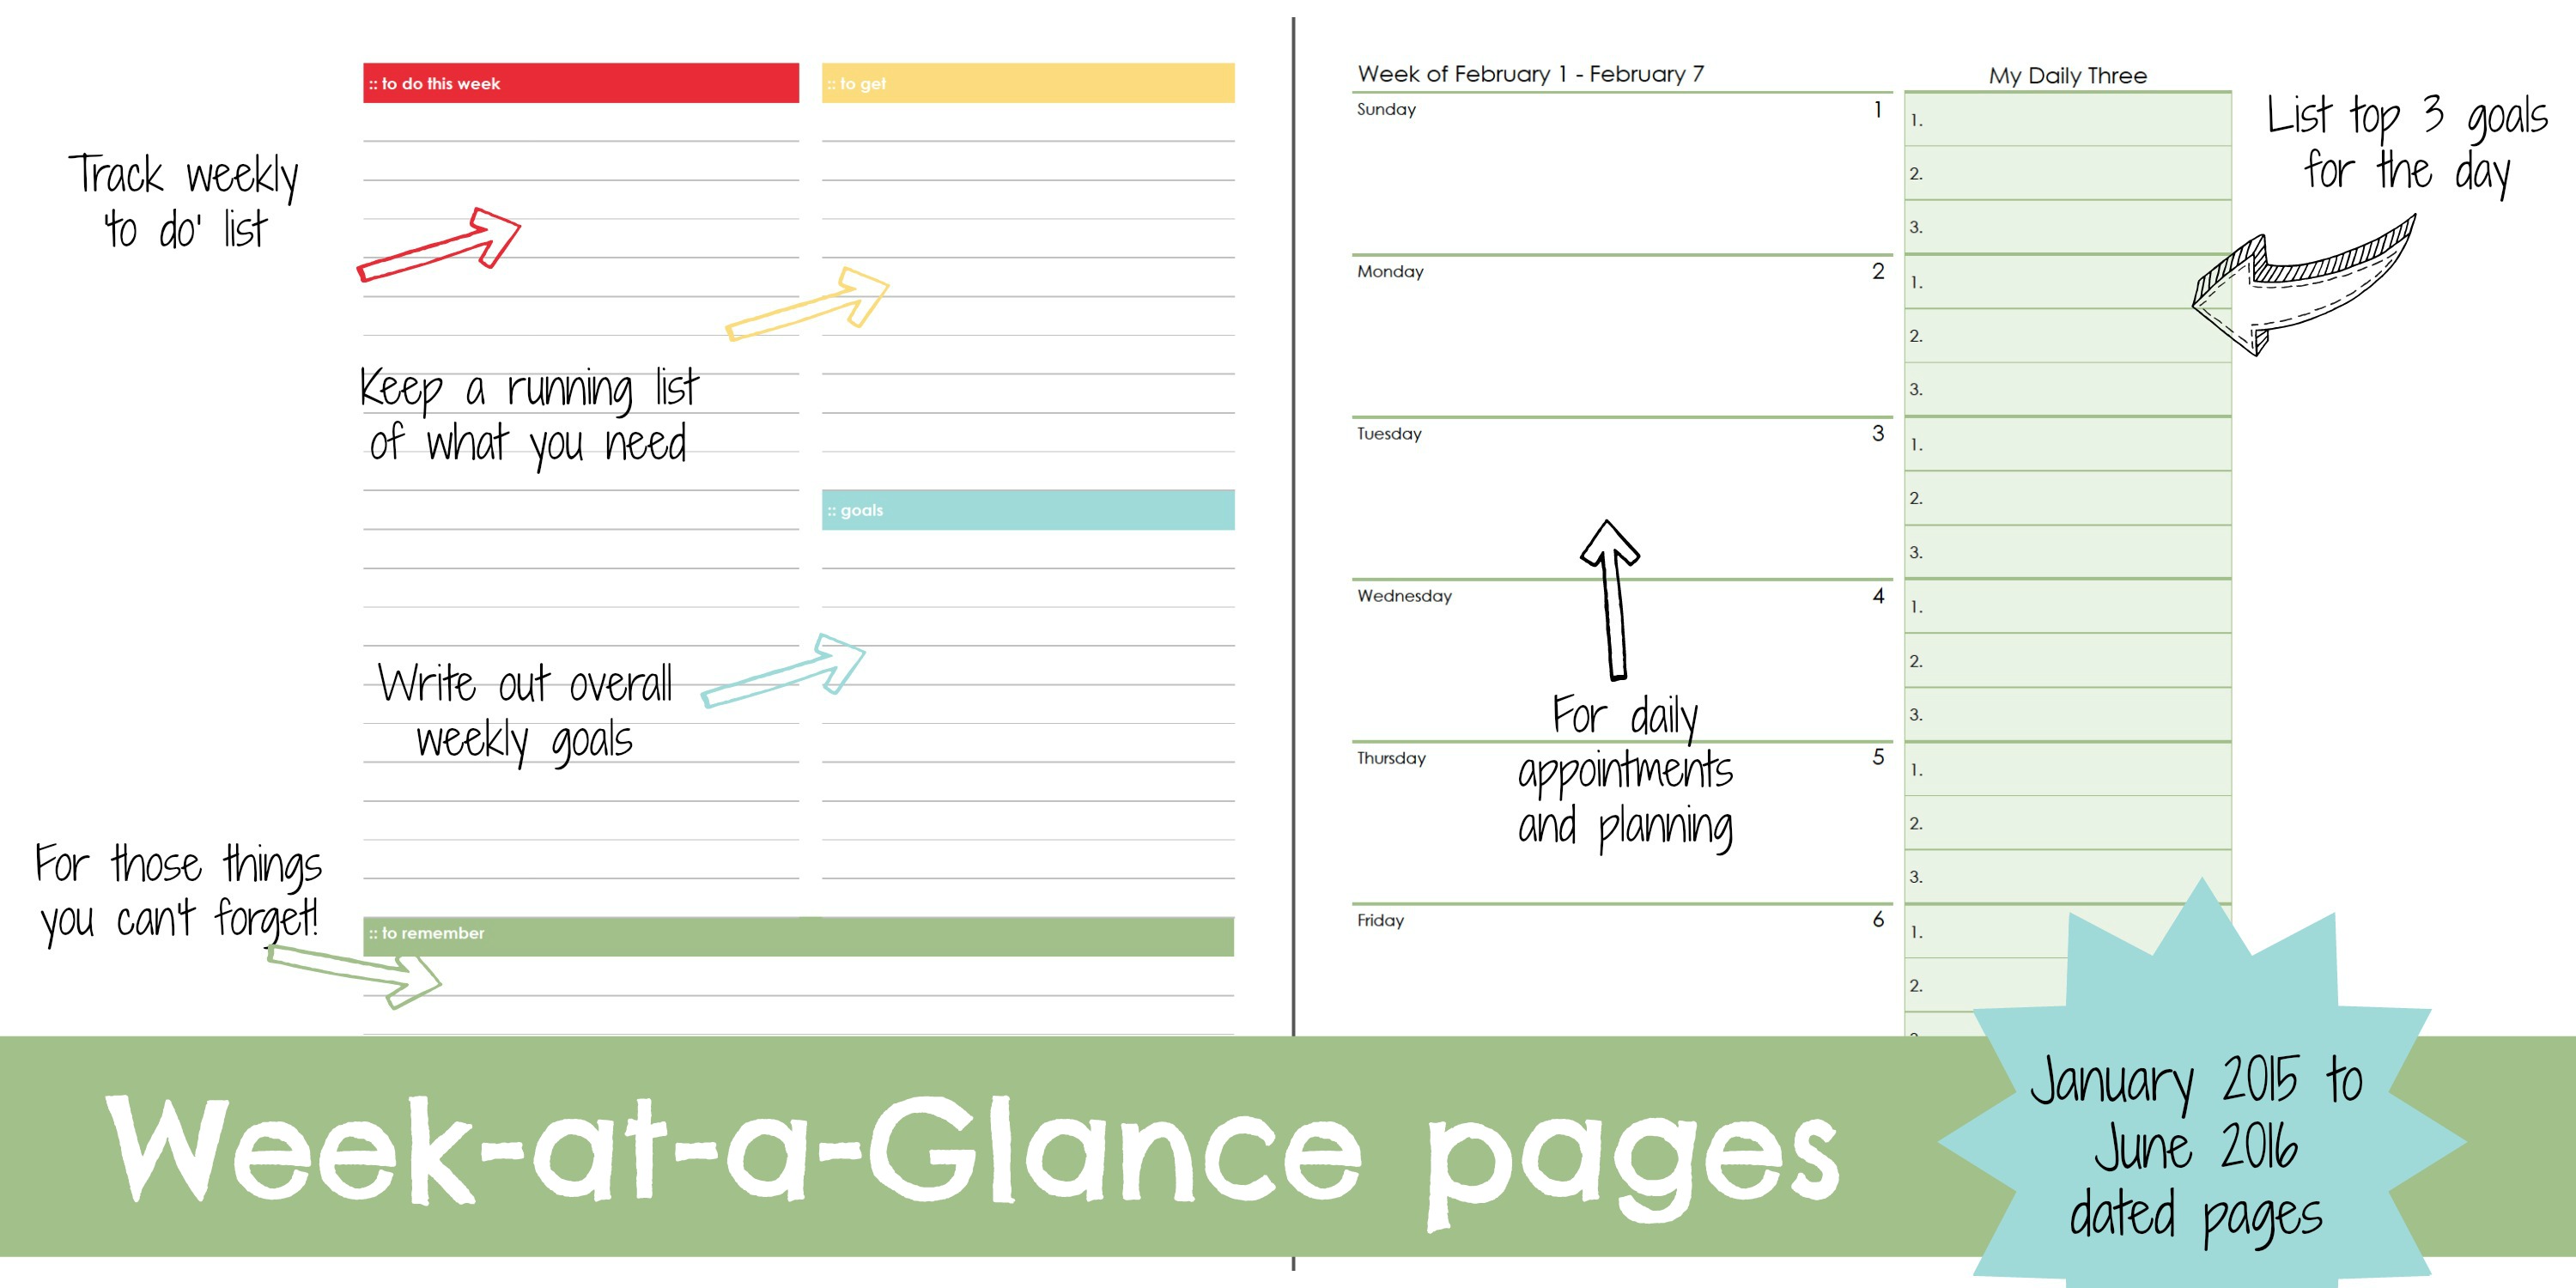 Planner pages week at a glance 1 2015 to 6 2016